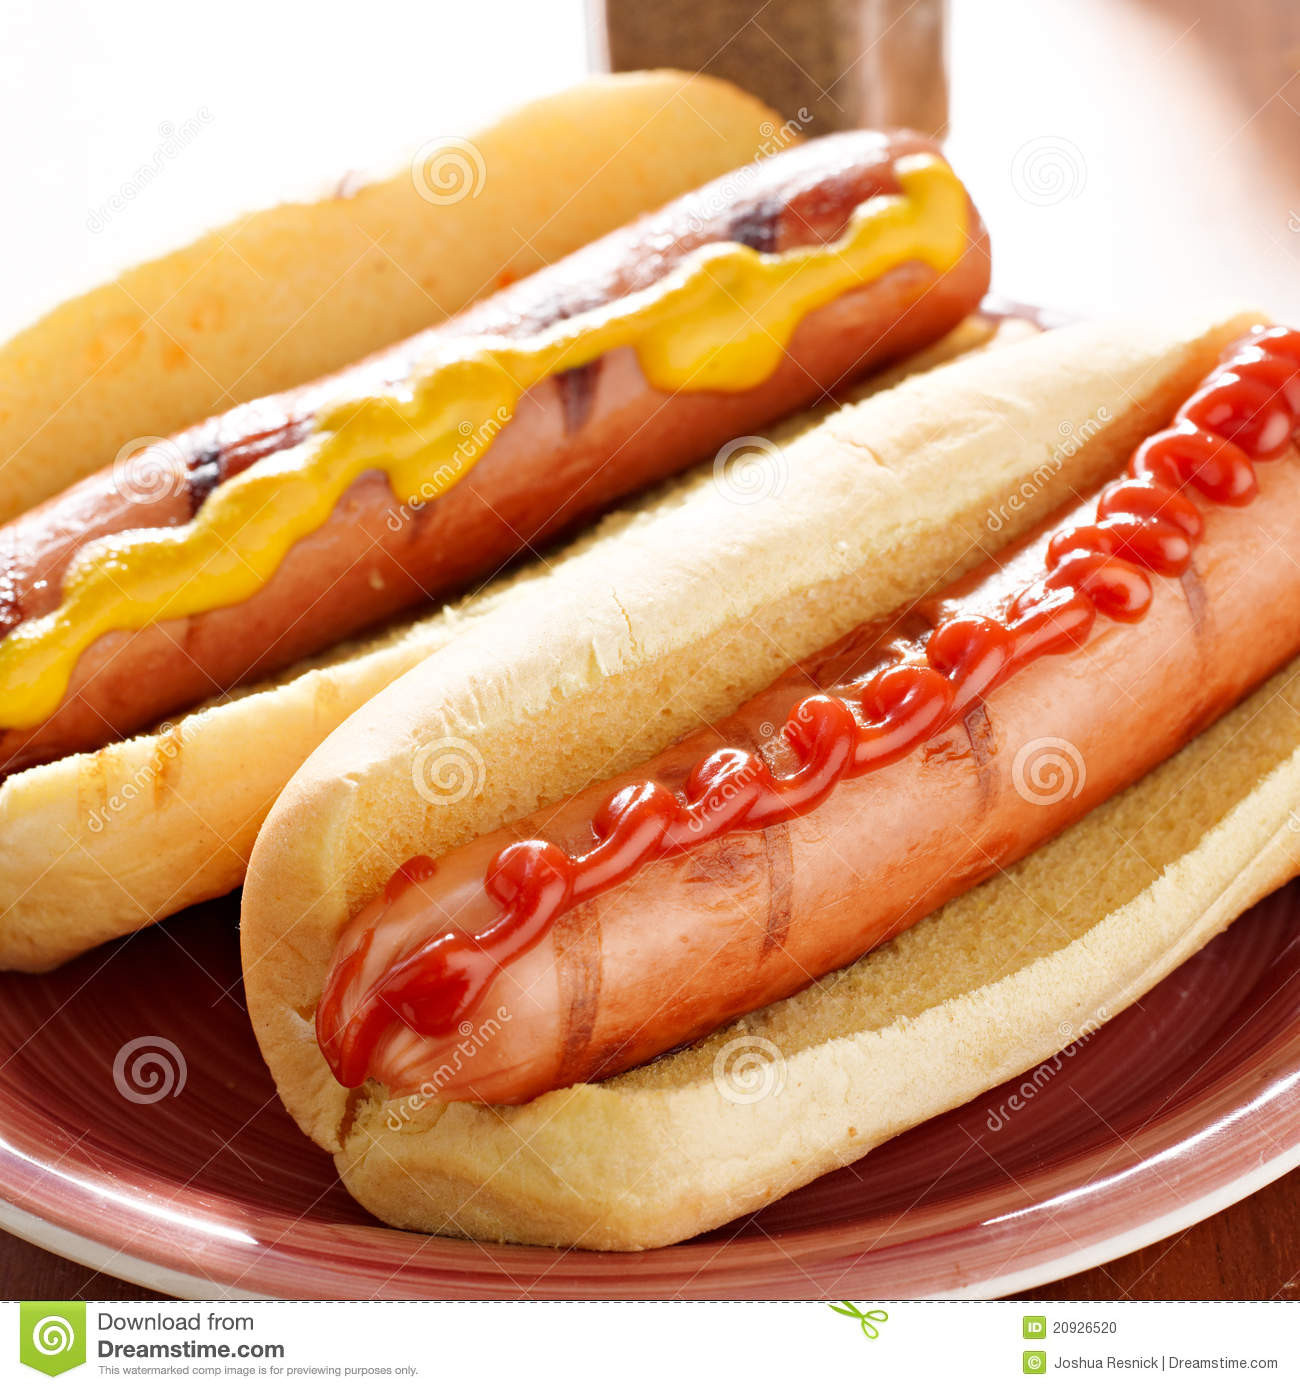 Hot Dogs Condiments
 Two Hot Dogs With Condiments Stock Image of dogs